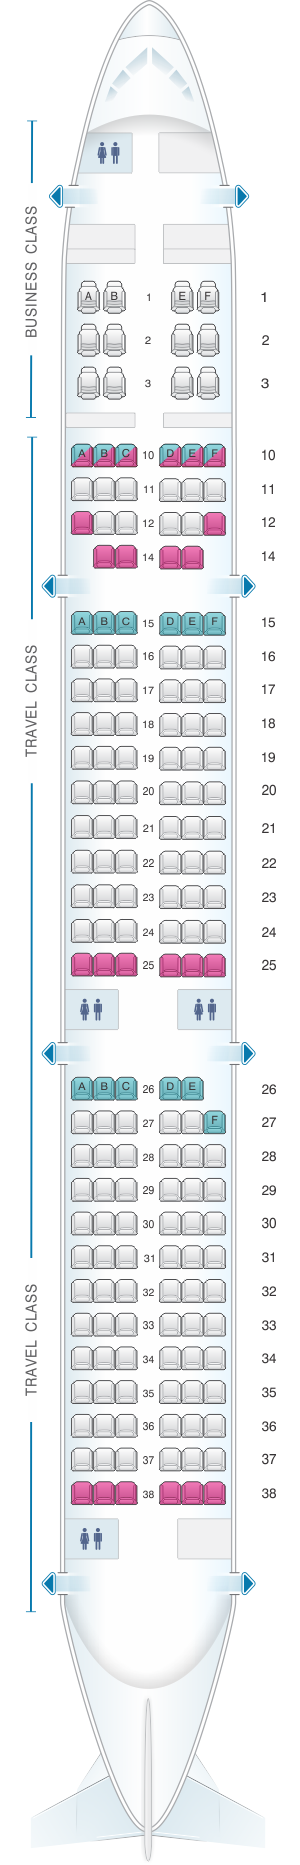 Seat map for Asiana Airlines Airbus A321 200 177PAX